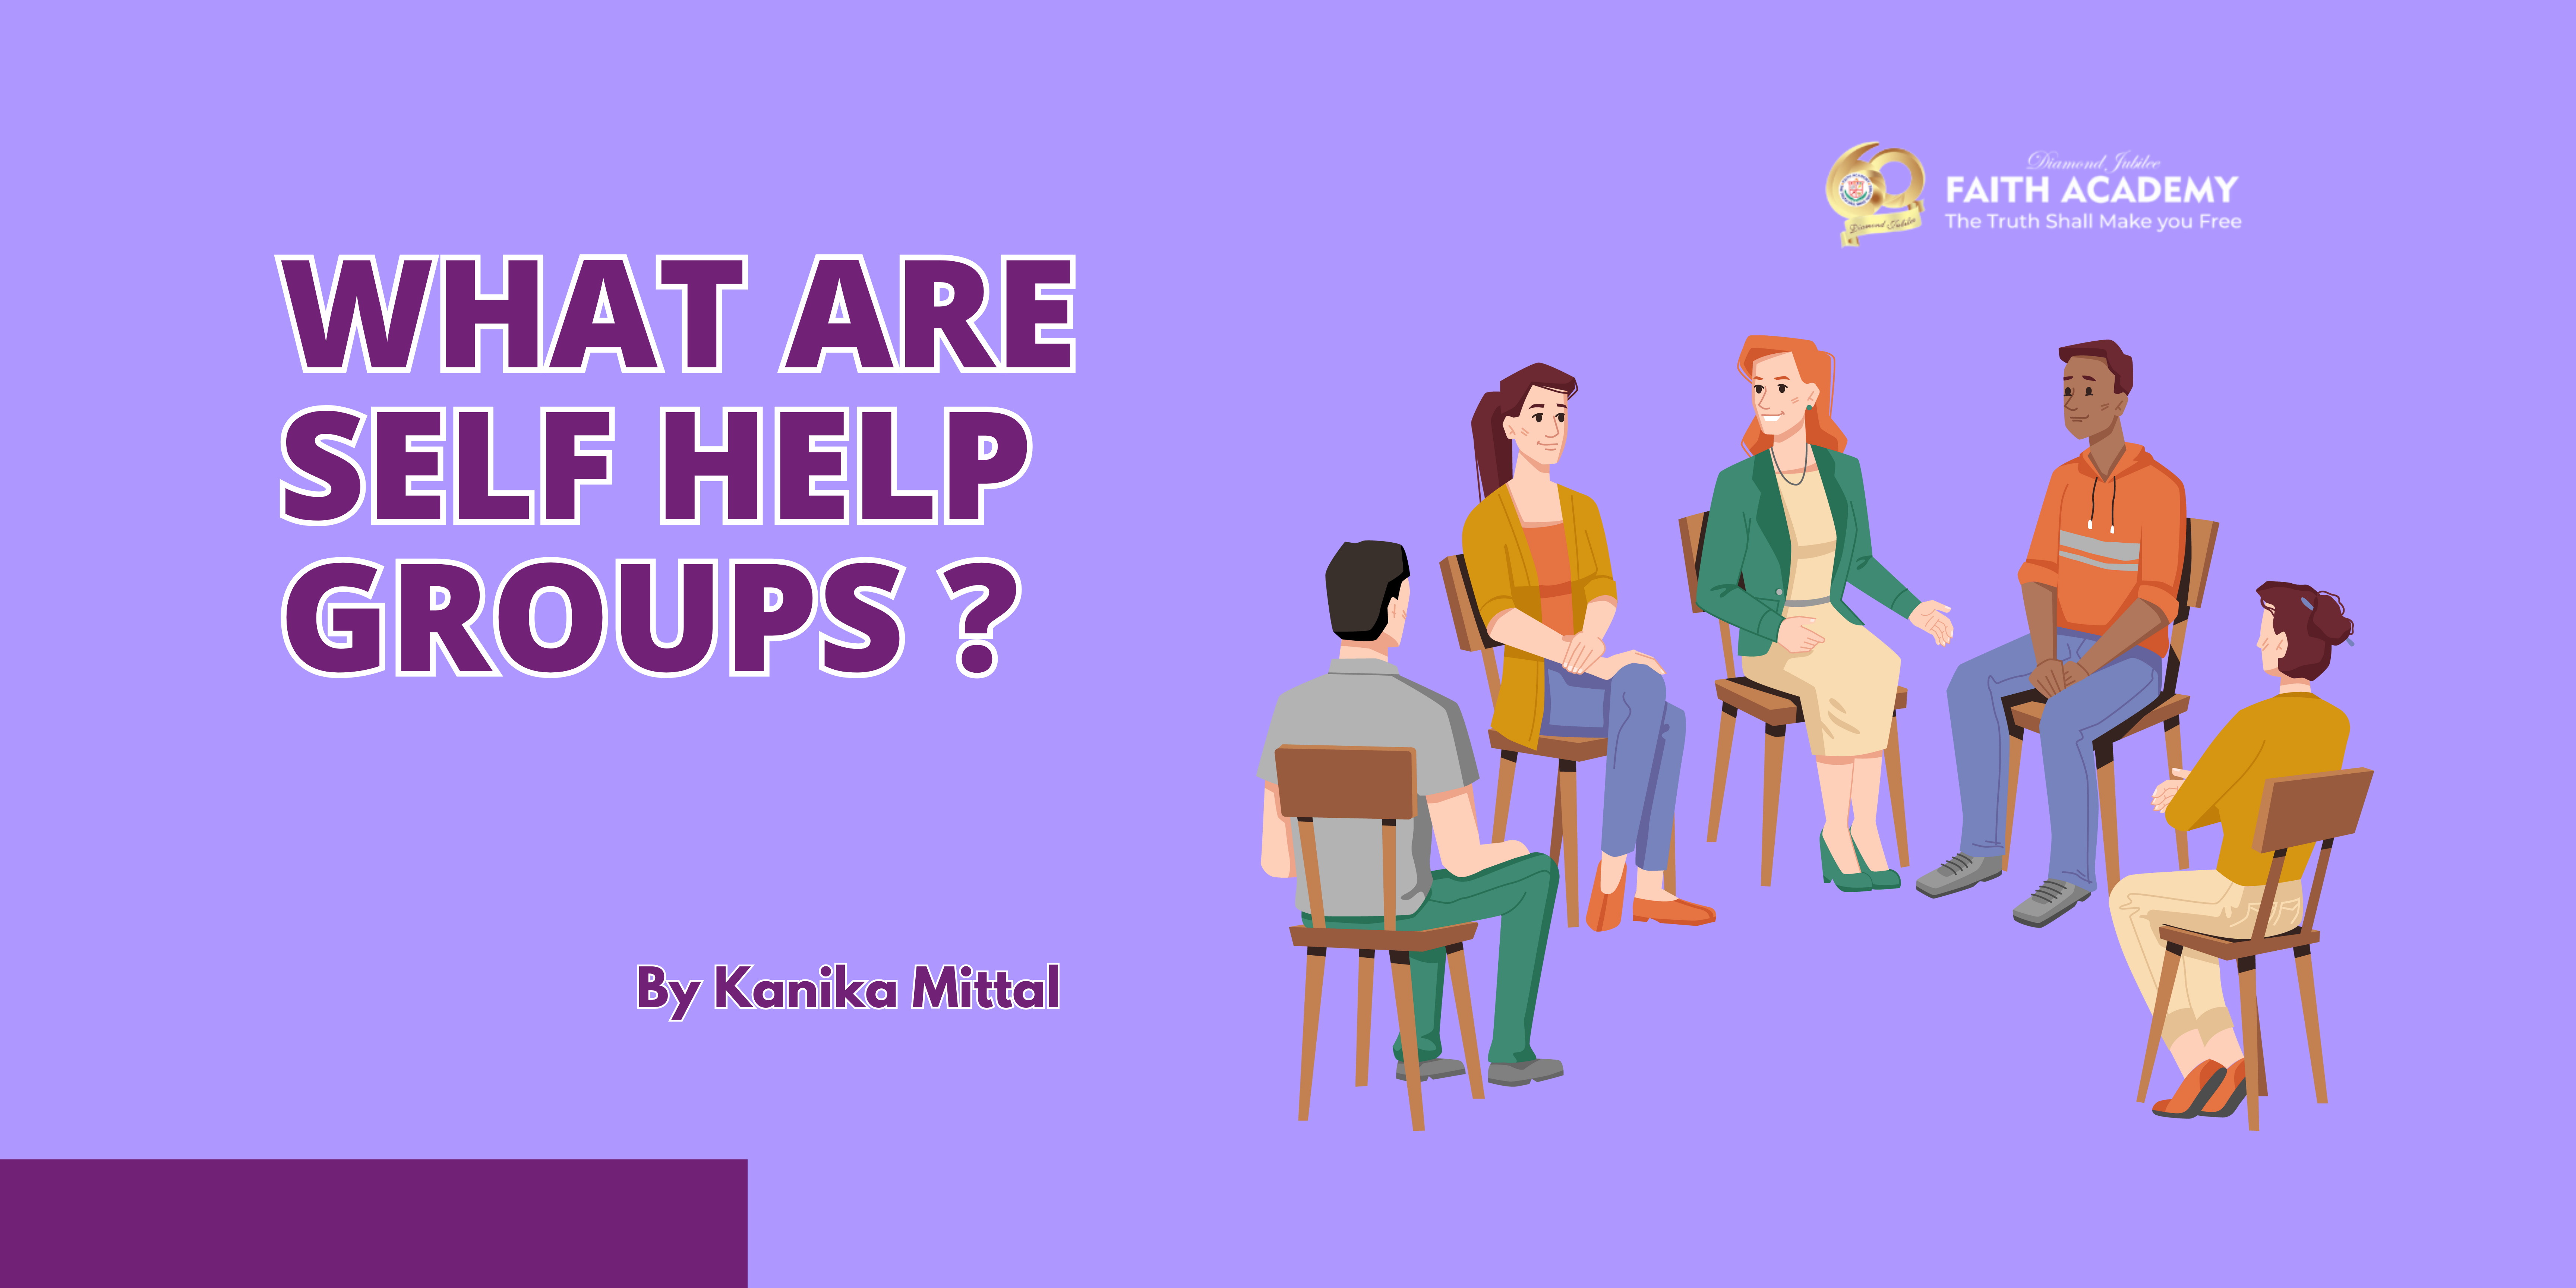 What are Self Help Groups?